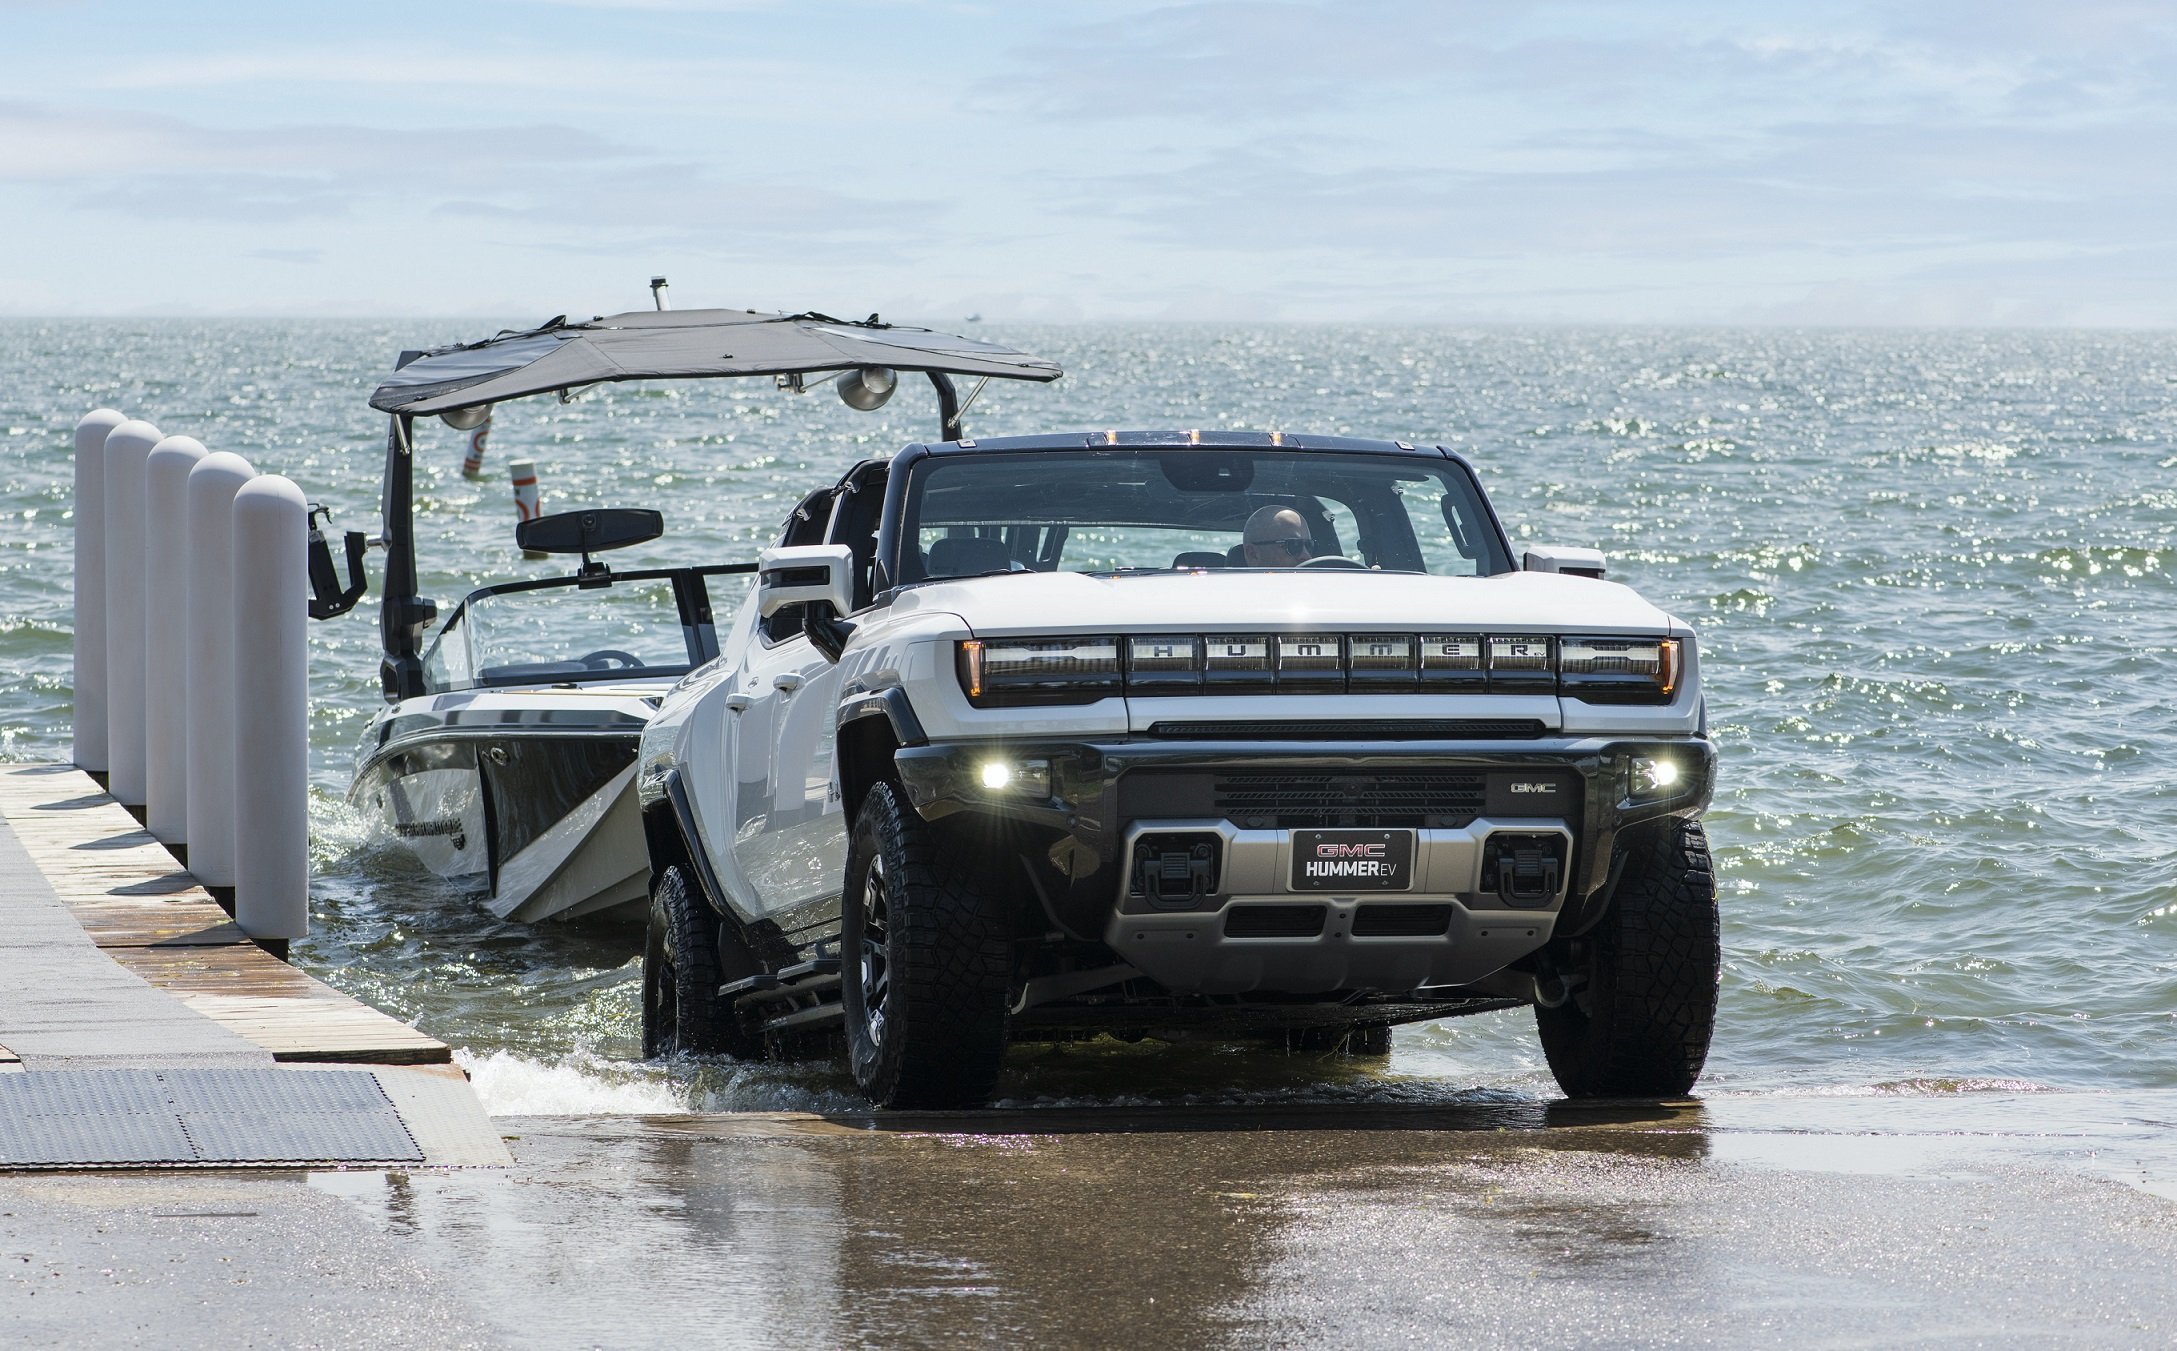 Hummer + boat: a gross combination.